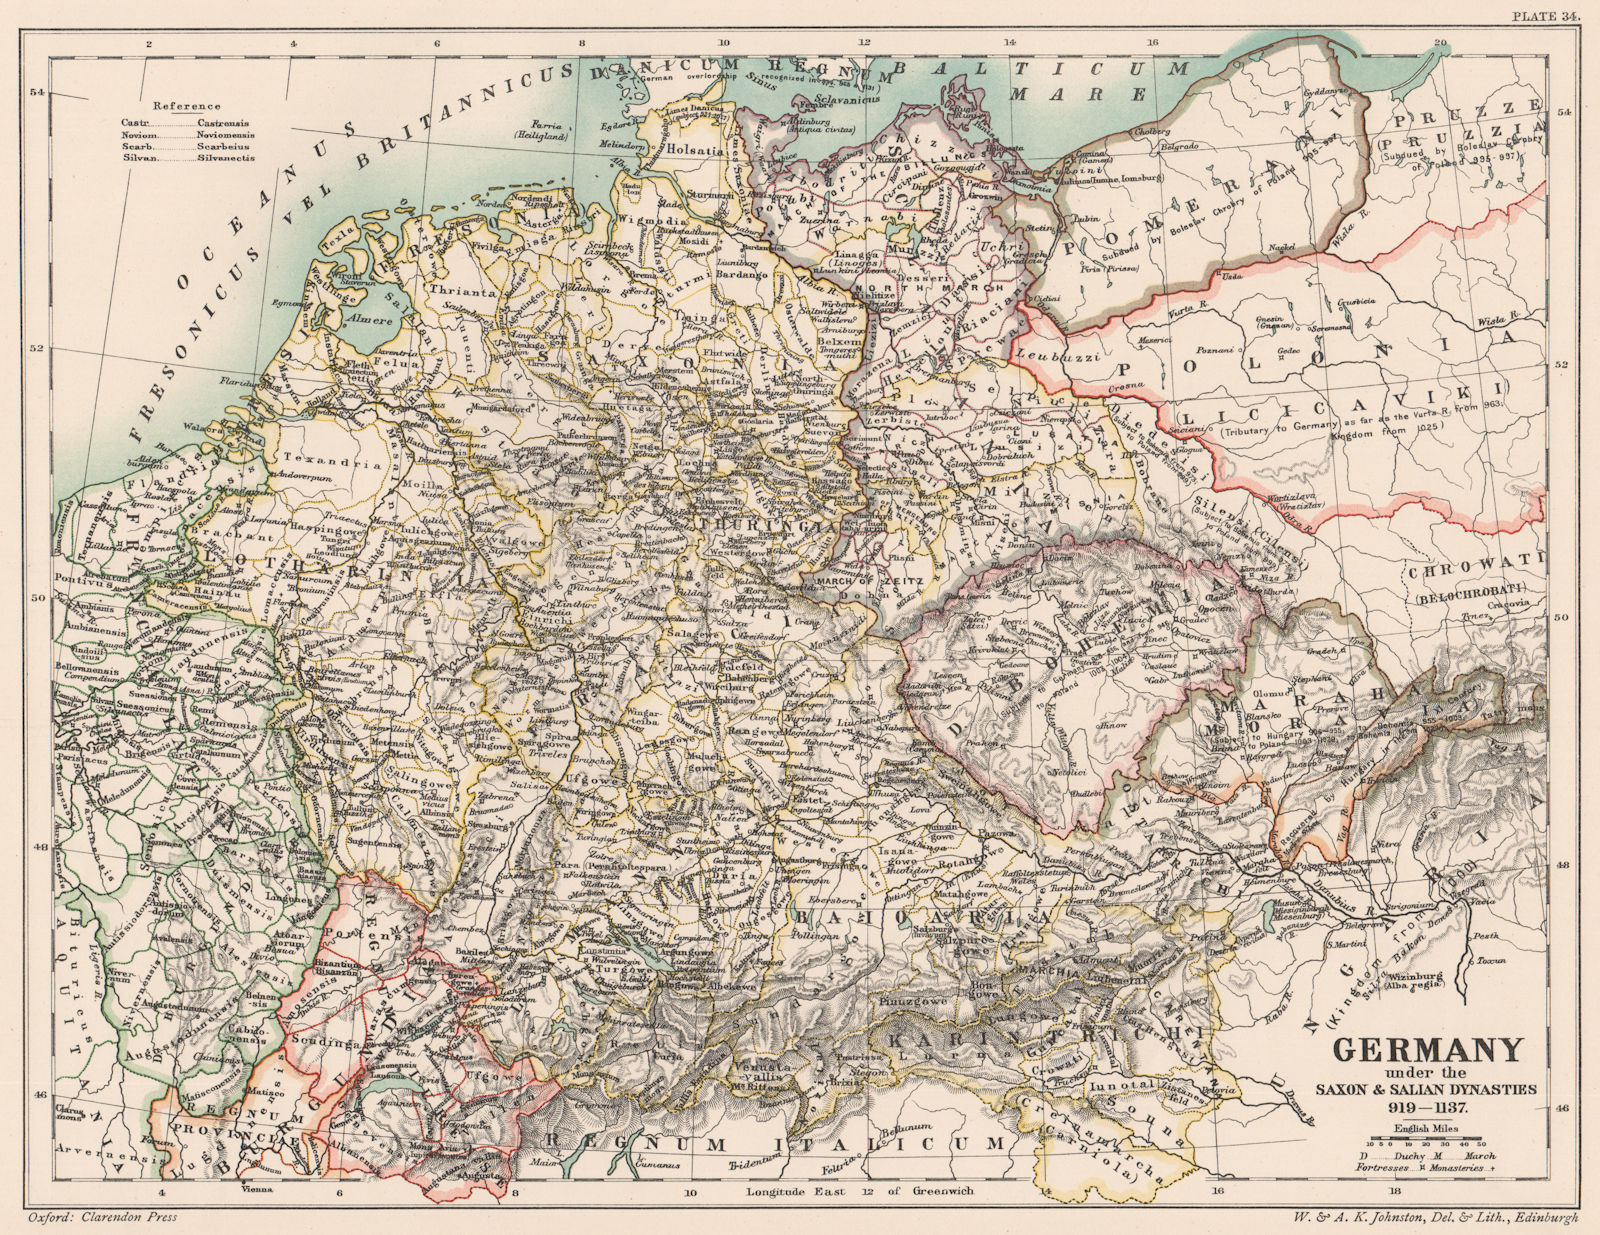 Associate Product GERMANY 919-1137. under the Saxon & Salian Dynasties 1902 old antique map